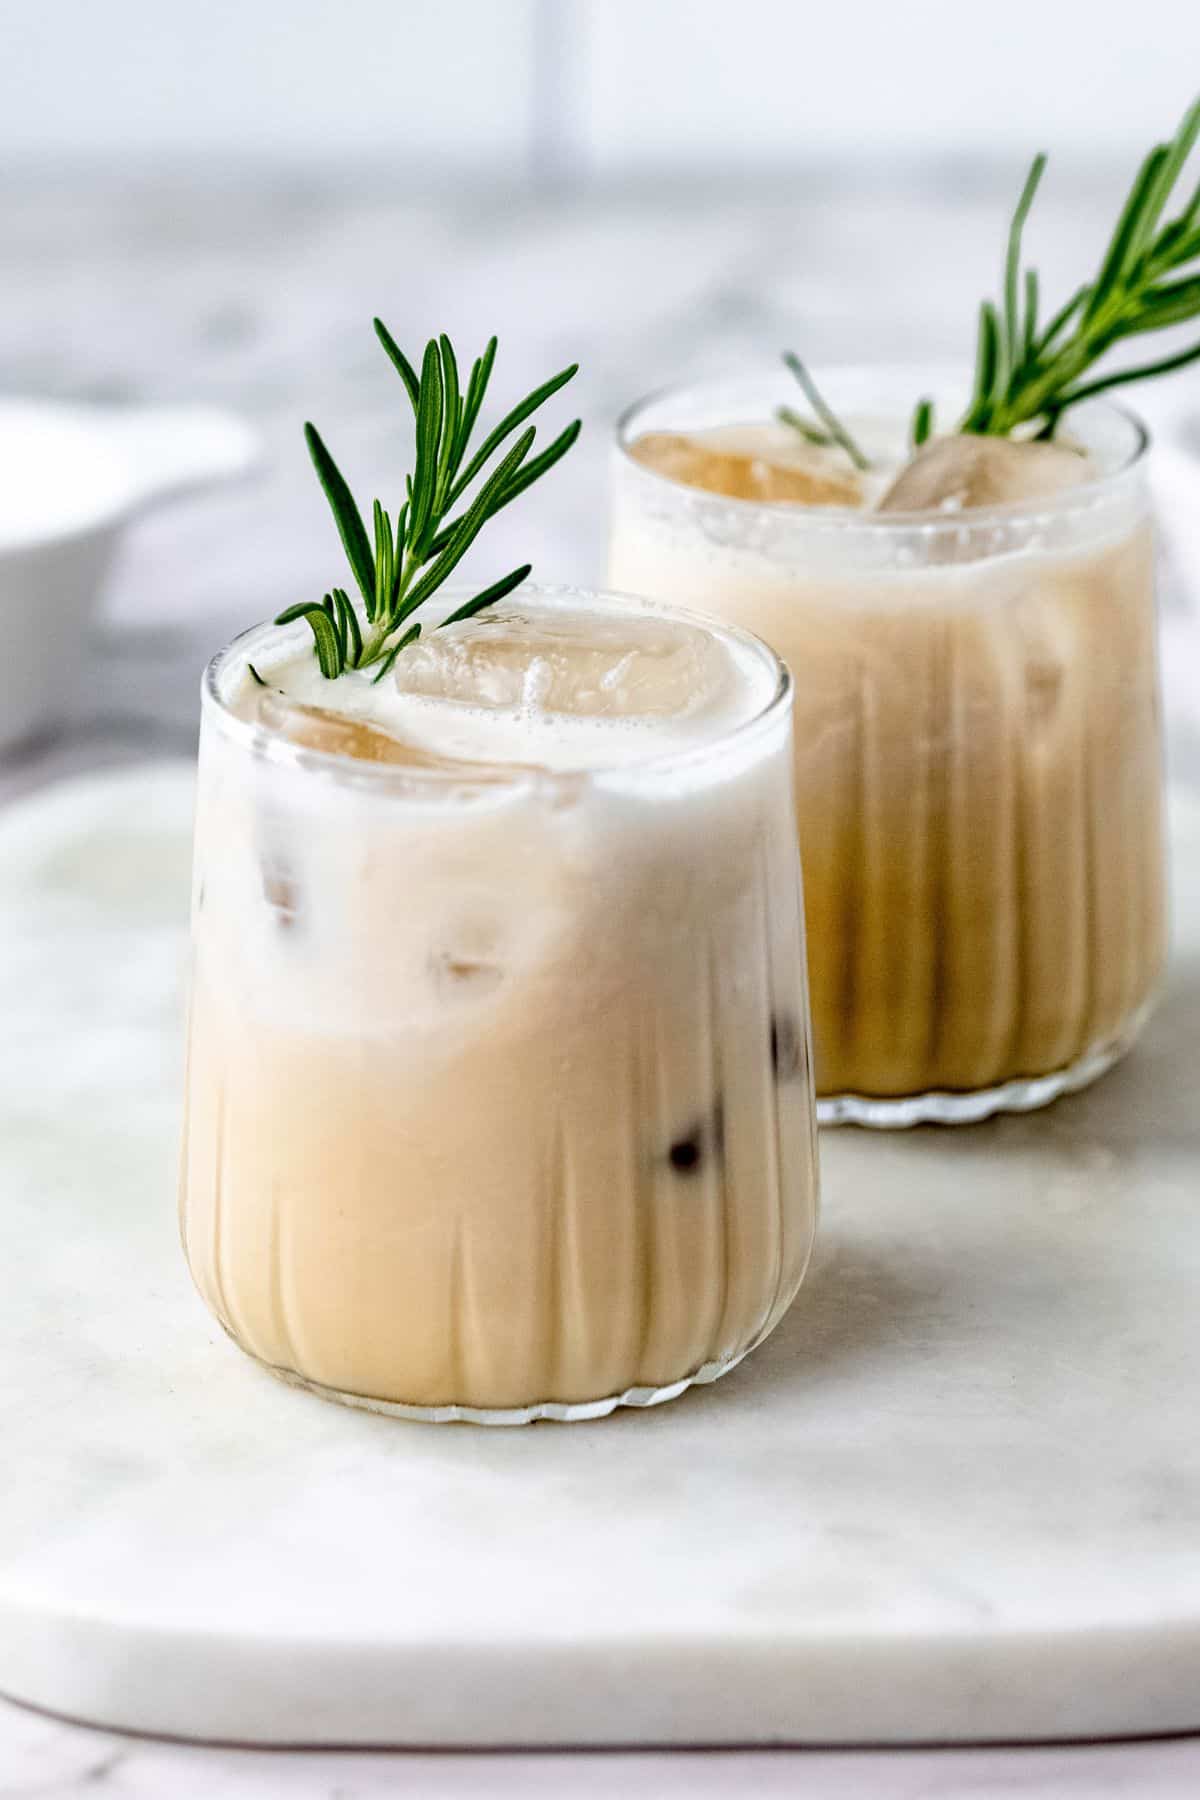 Cocktails garnished with fresh rosemary.